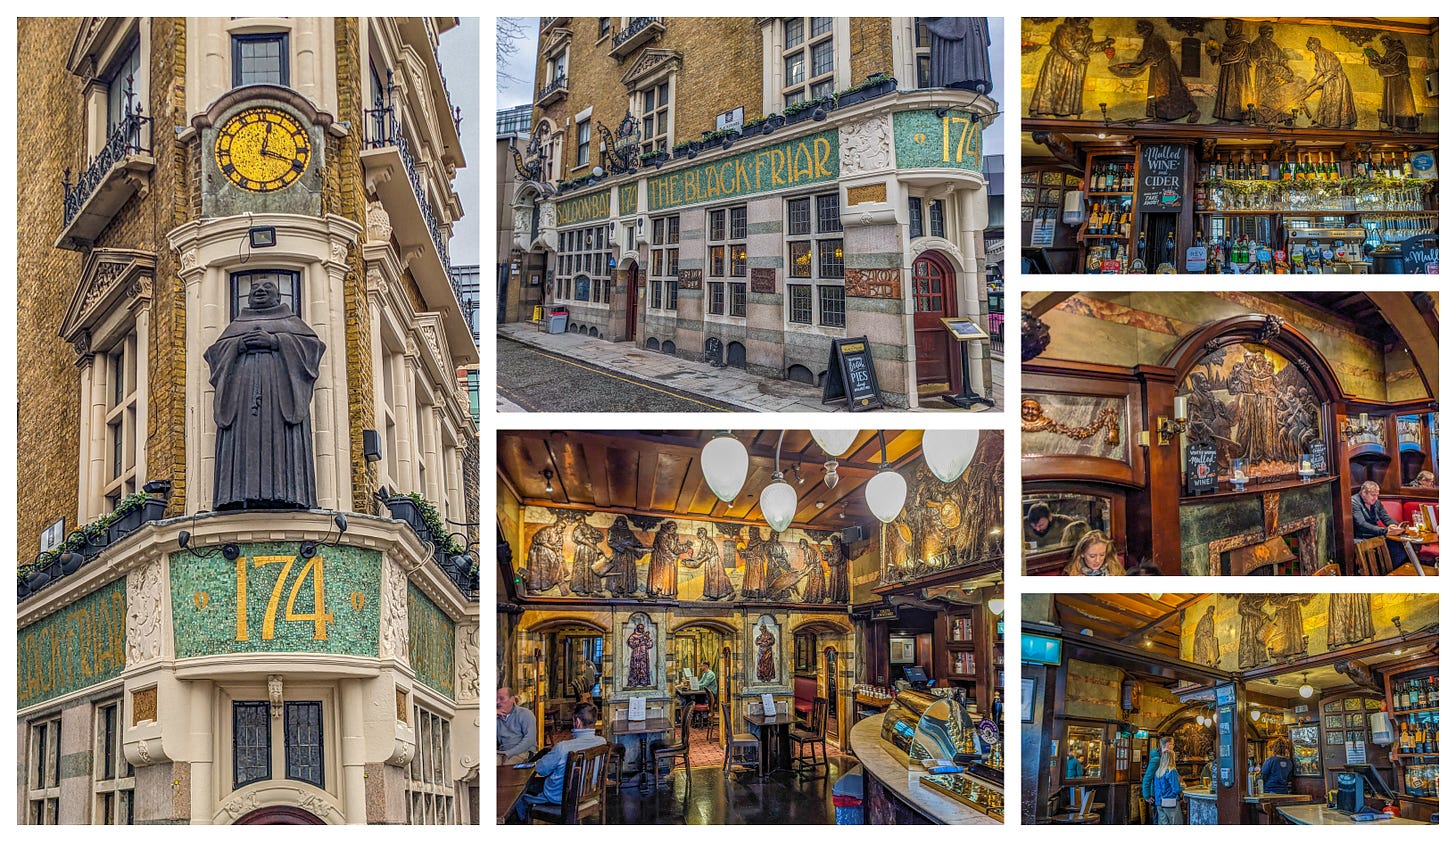 A collage of photos showing the narrow triangle-shaped exterior of the pub, plus interior photos showing murals of monks on all of the walls. 